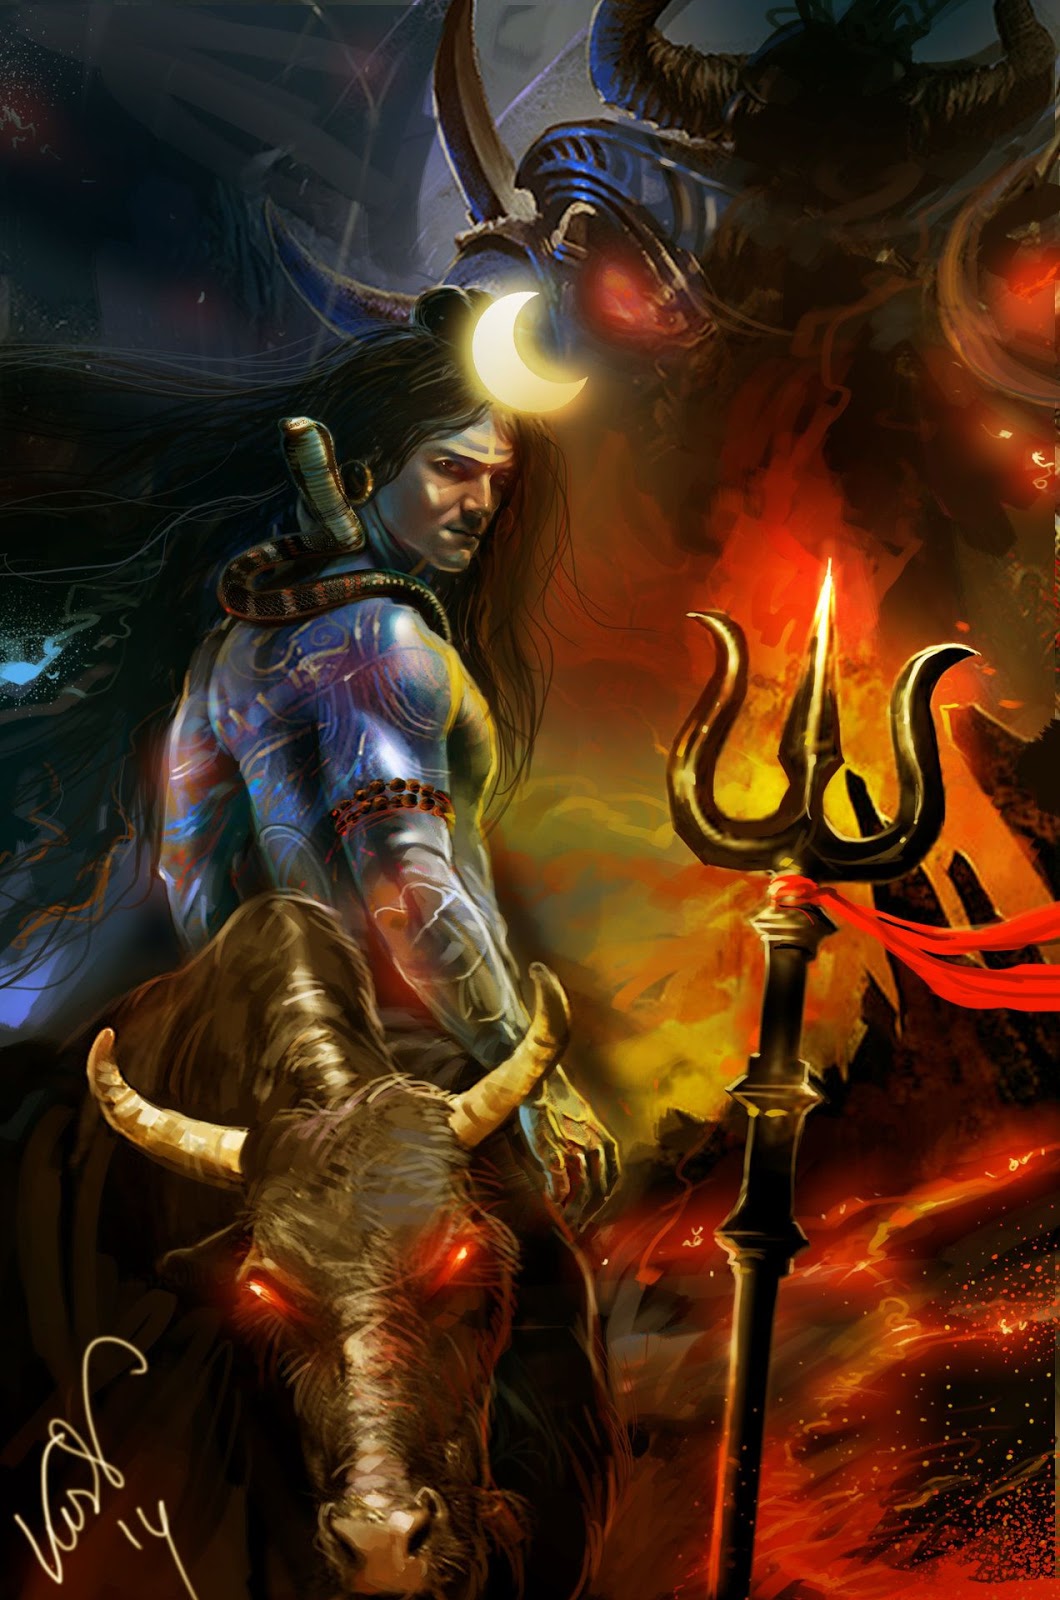 Whatsapp] Lord Shiva Angry HD Images and Wallpapers | God Wallpaper